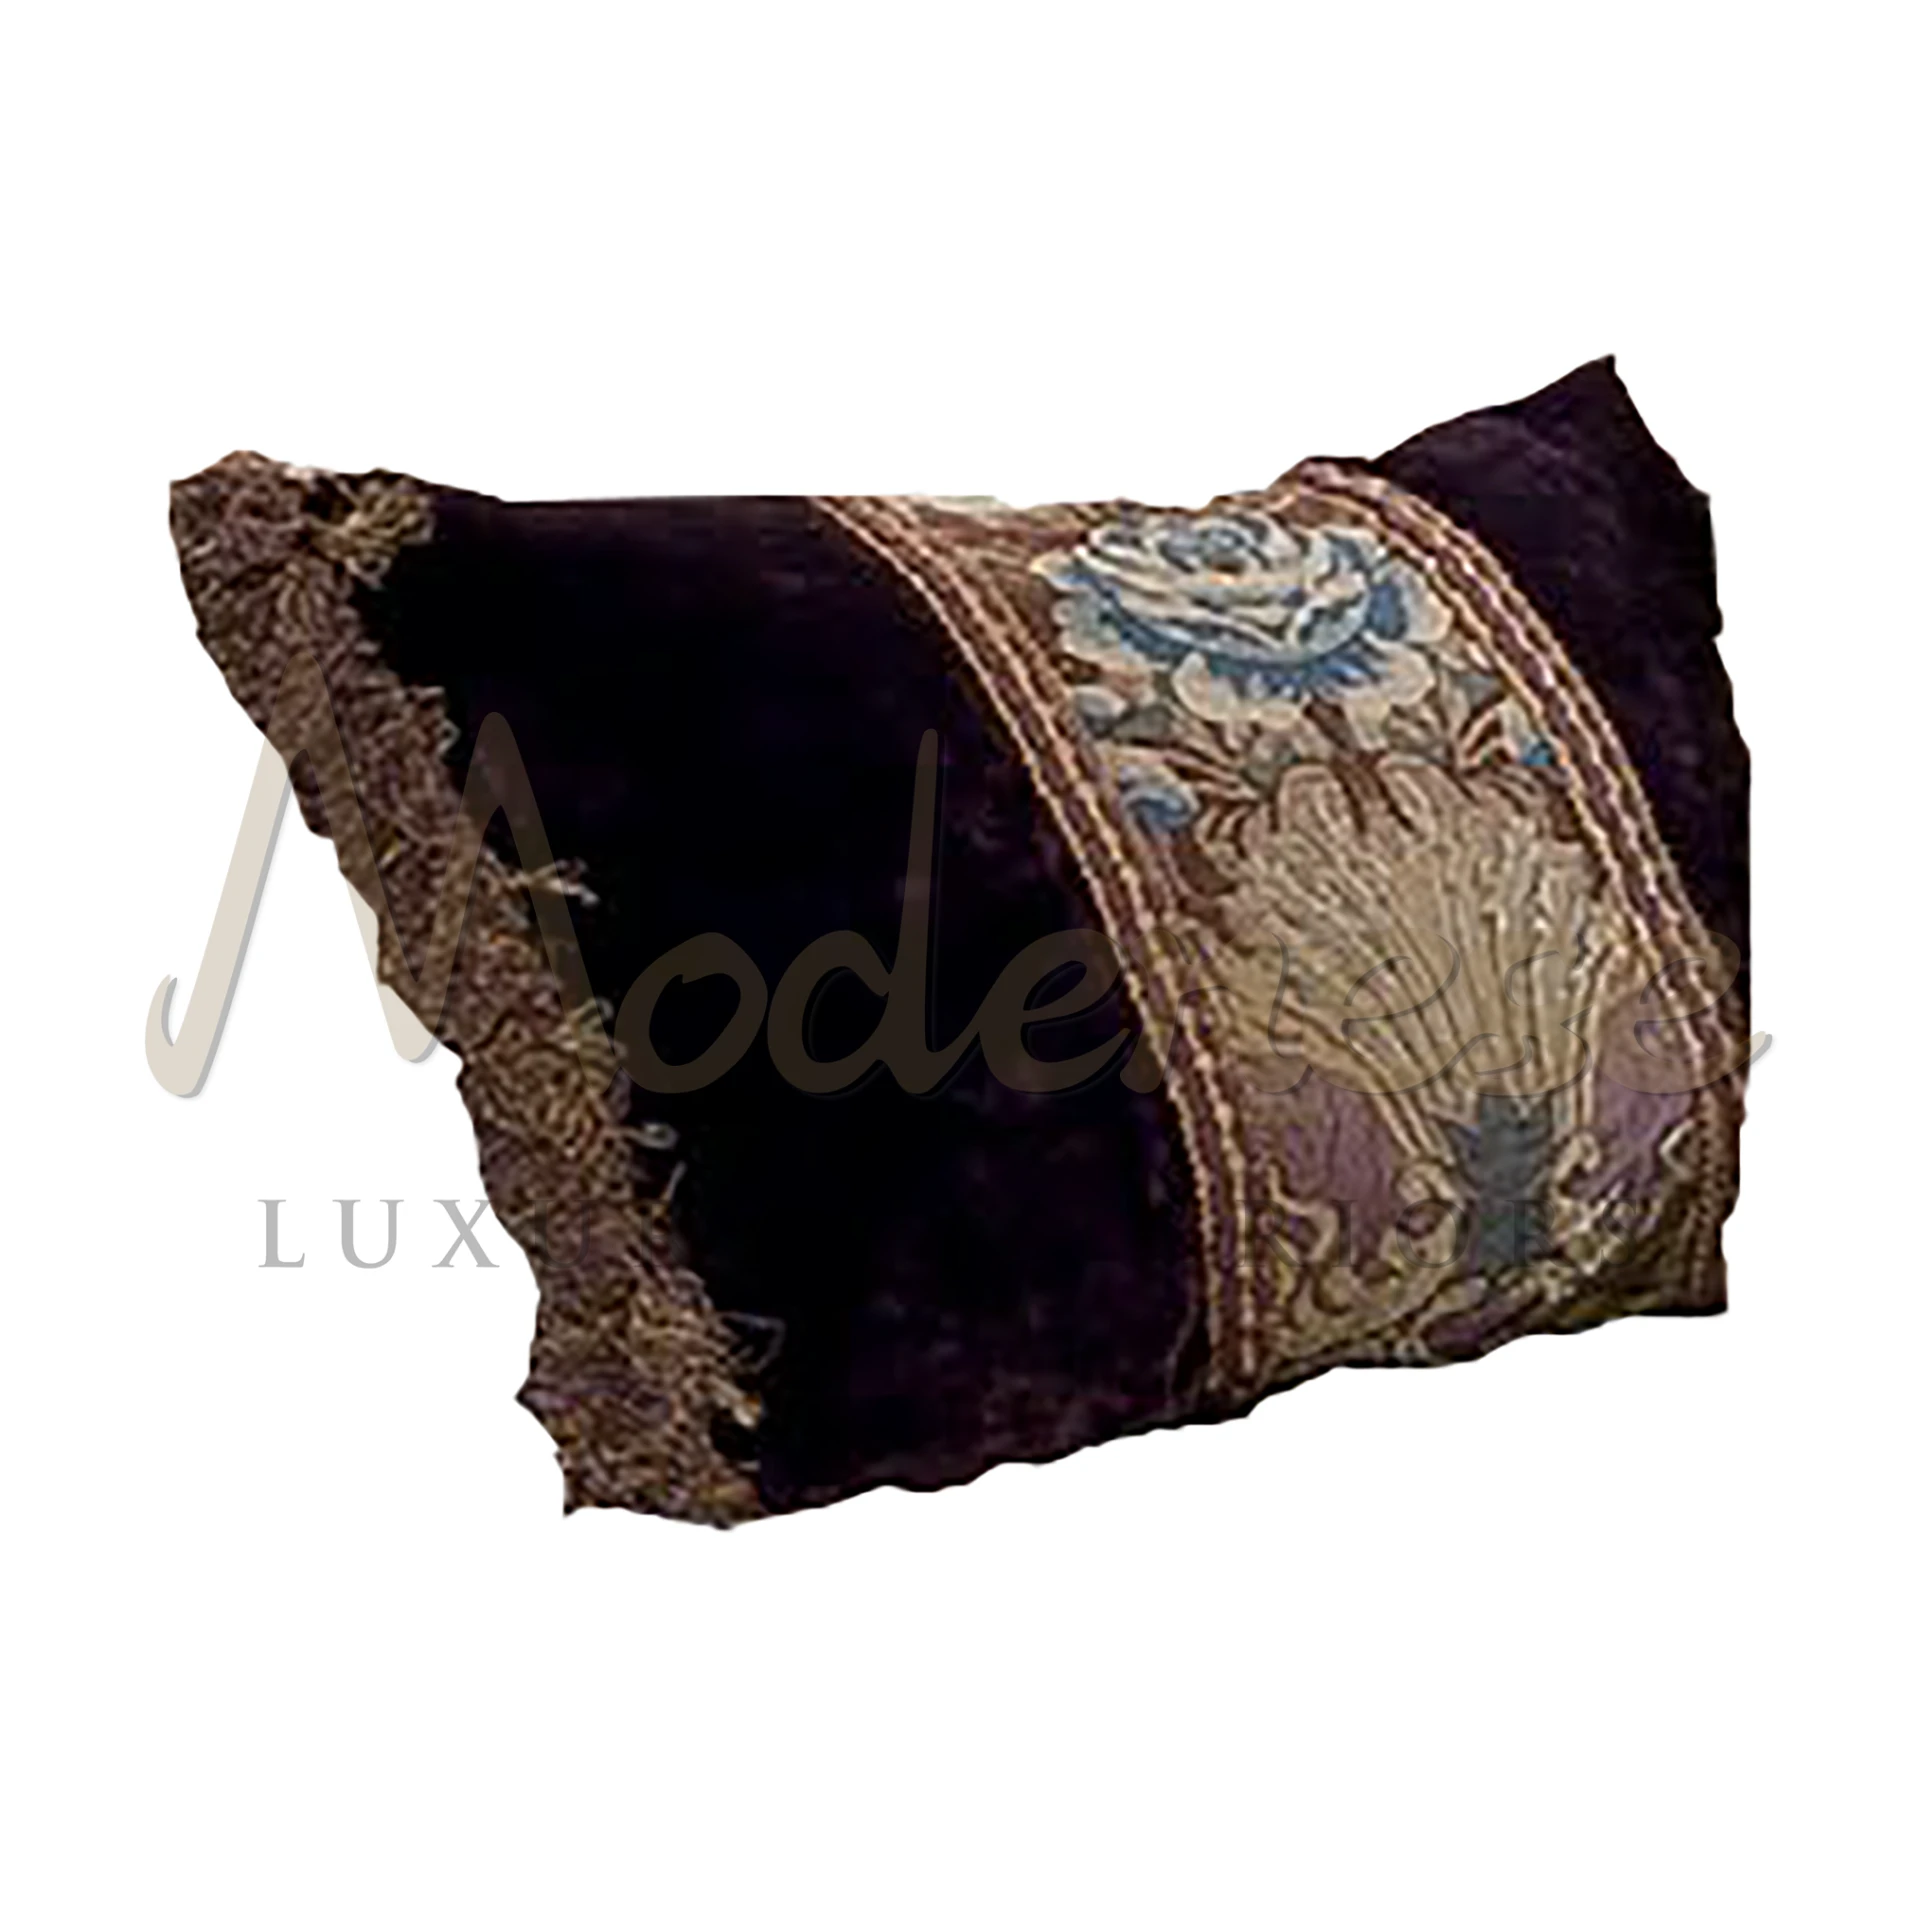 Royal Designer Pillow by Modenese Interiors: A masterpiece of luxury, with sumptuous fabrics and ornate embroidery.